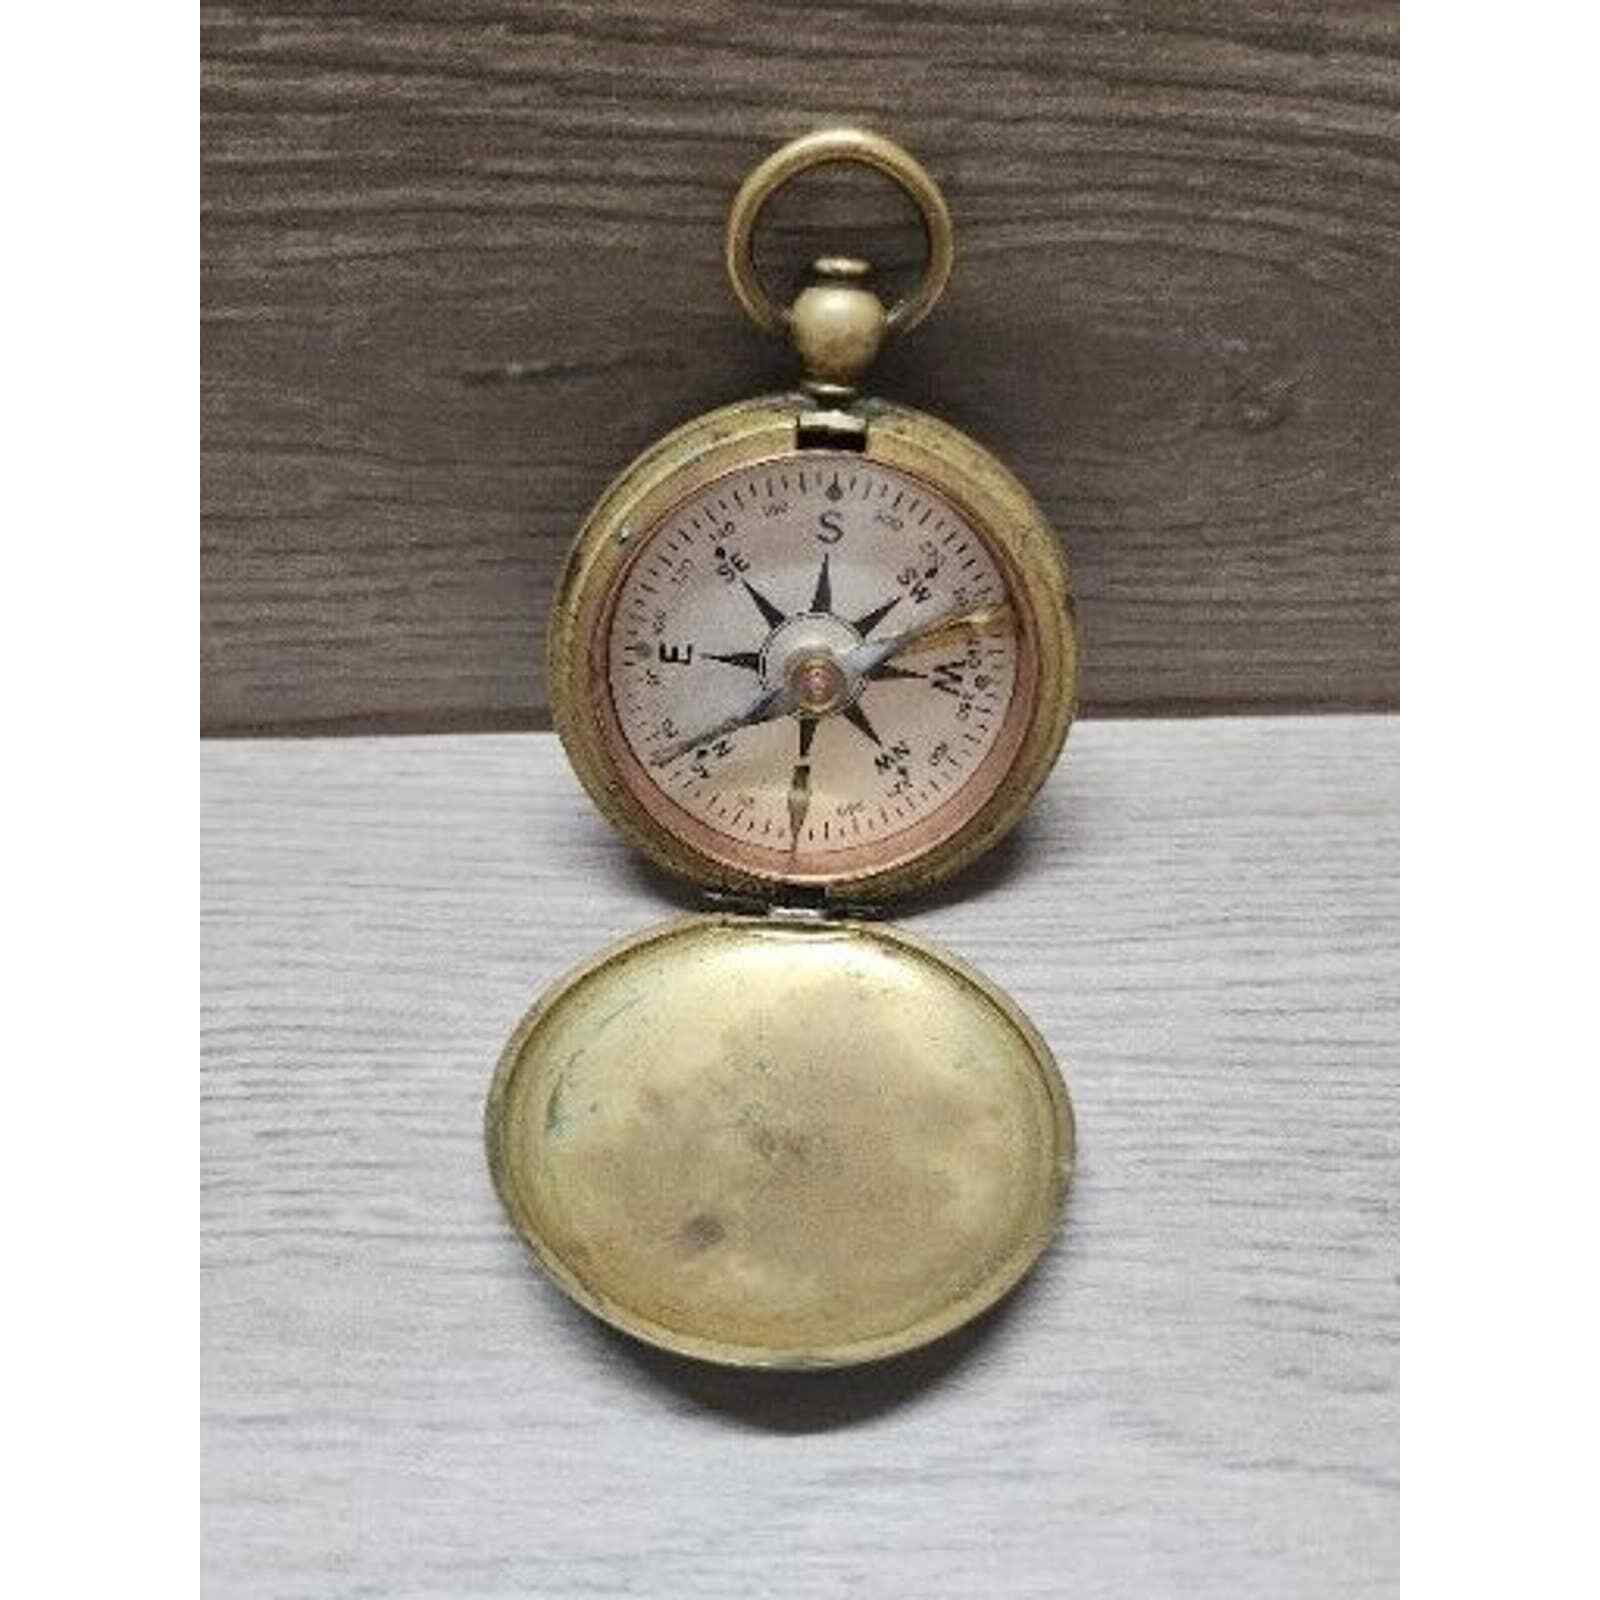 VINTAGE TAYLOR WW2 US MILITARY USCE CORPS OF ENGINEERS BRASS COMPASS